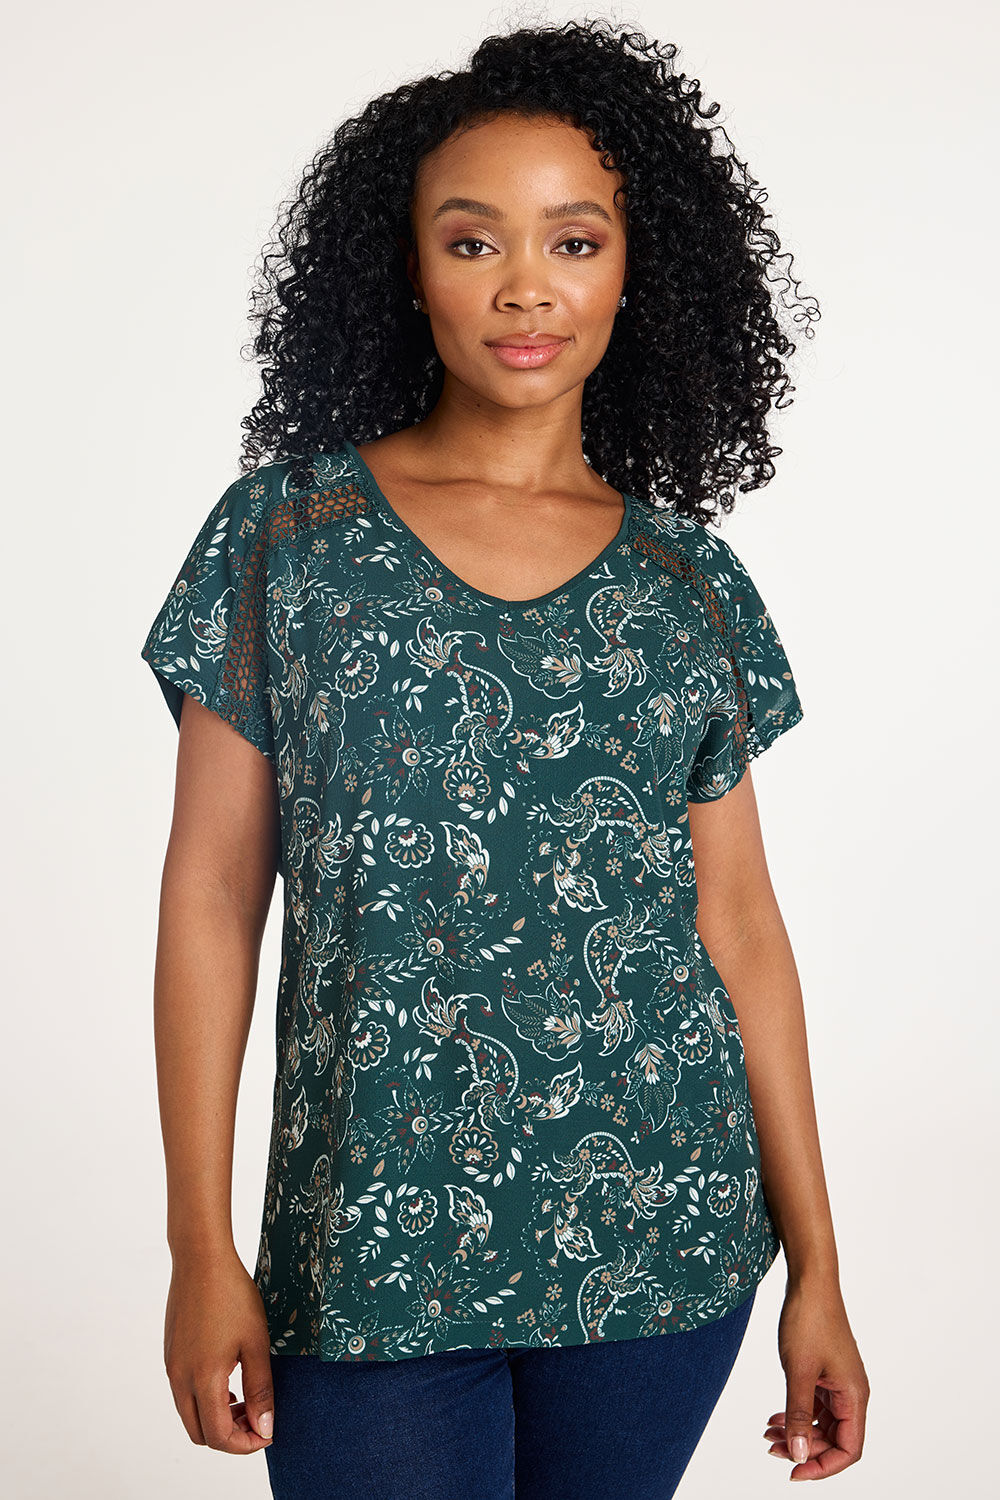 Bonmarche Green Short Sleeve Paisley Print Woven Front Top, Size: 10